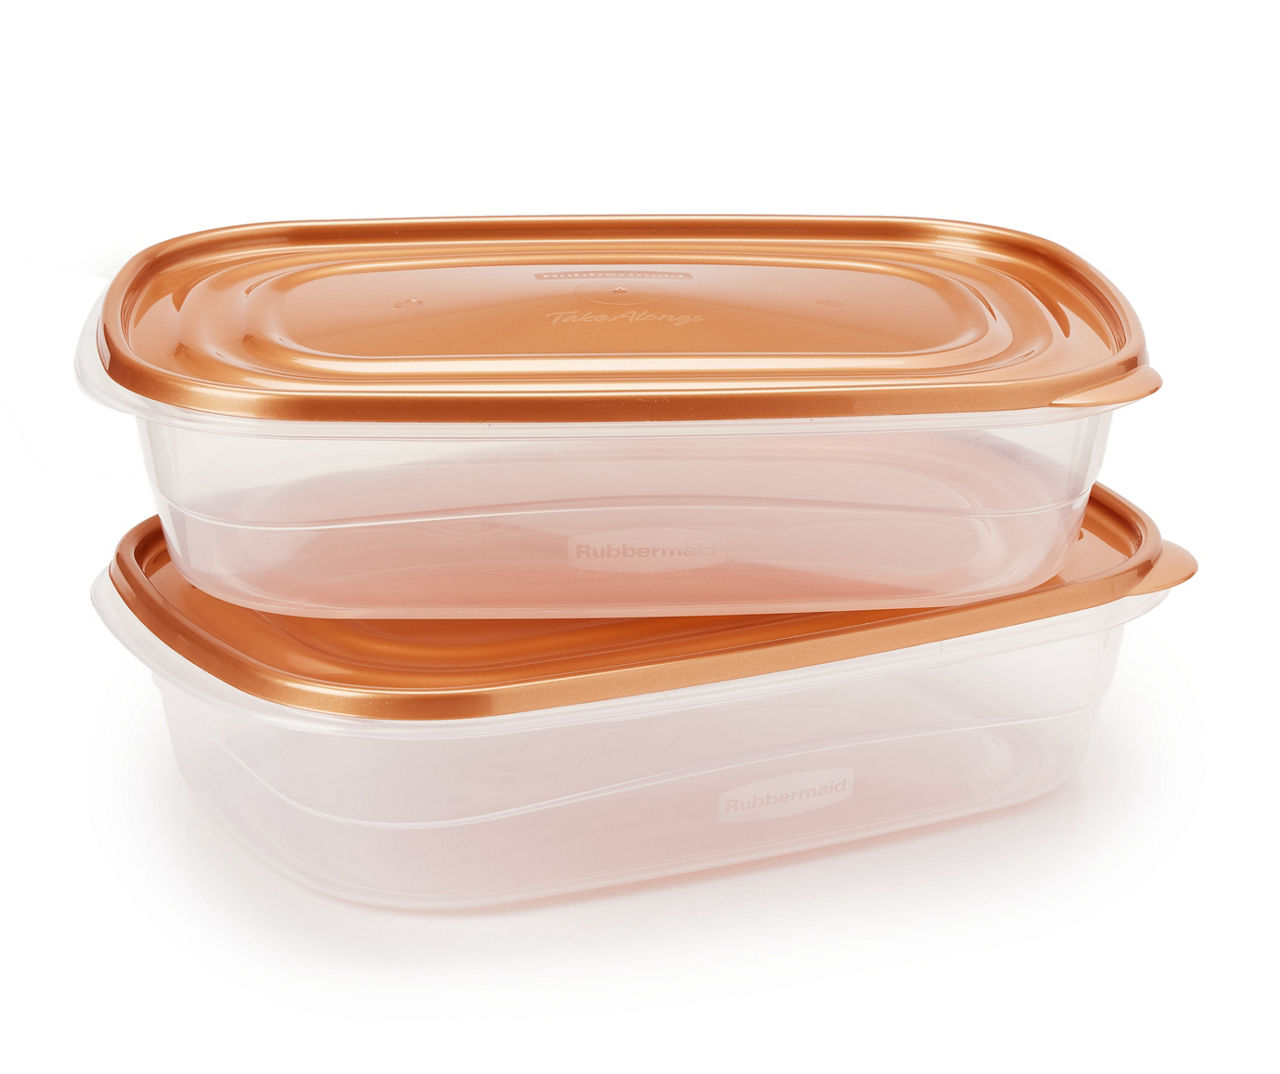 TakeAlongs® Large Rectangular Food Storage Containers, 1 Gallon